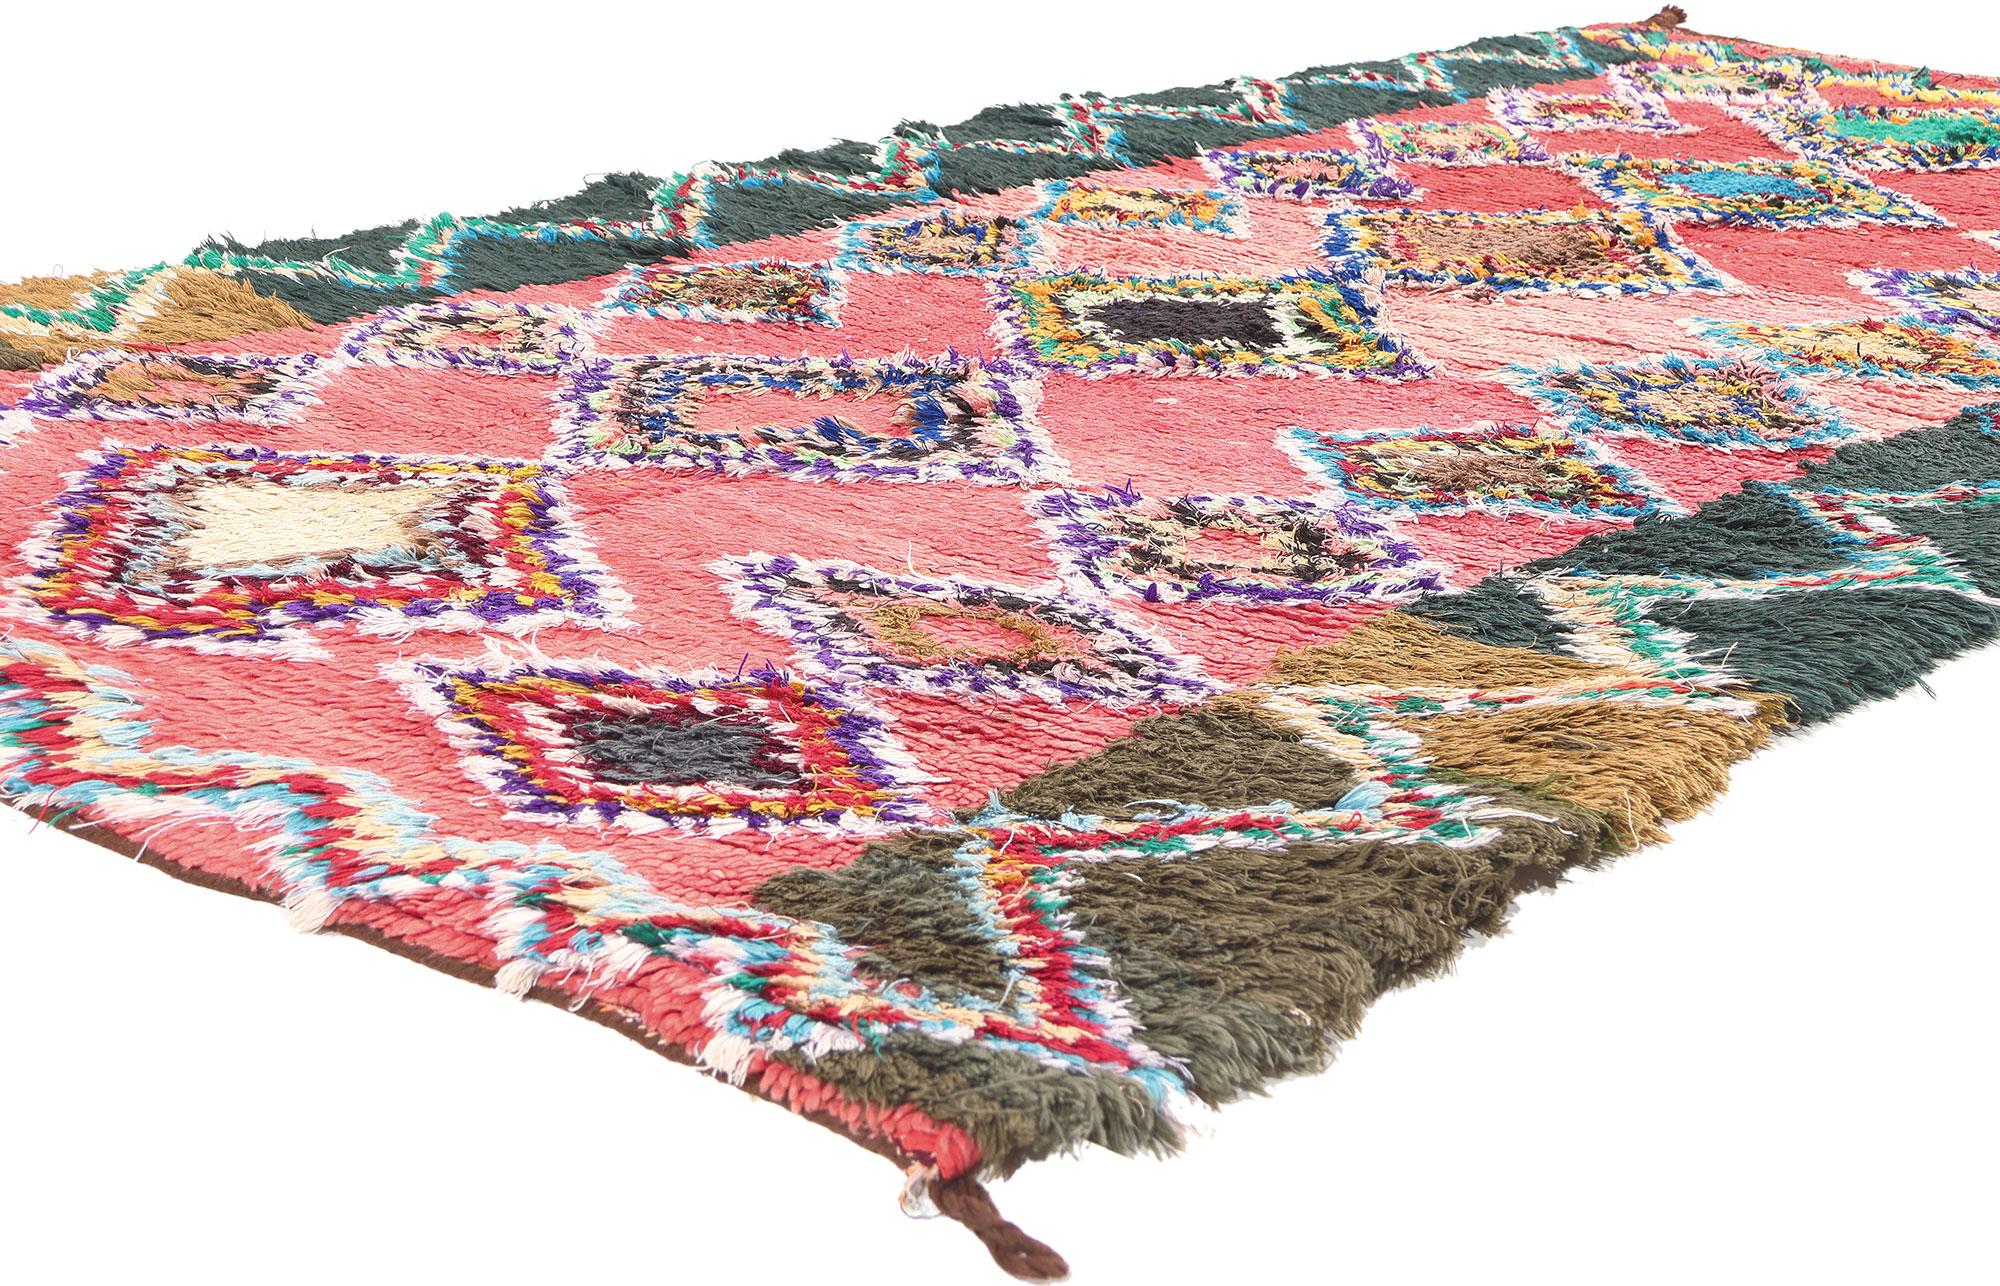 20387 Vintage Moroccan Azilal Rag Rug, 04'07 x 08'04. Embark on a sustainable design journey with this hand-knotted wool vintage Moroccan Azilal rag rug, where boho chic style seamlessly intertwines with nomadic charm, resulting in a tribal textile